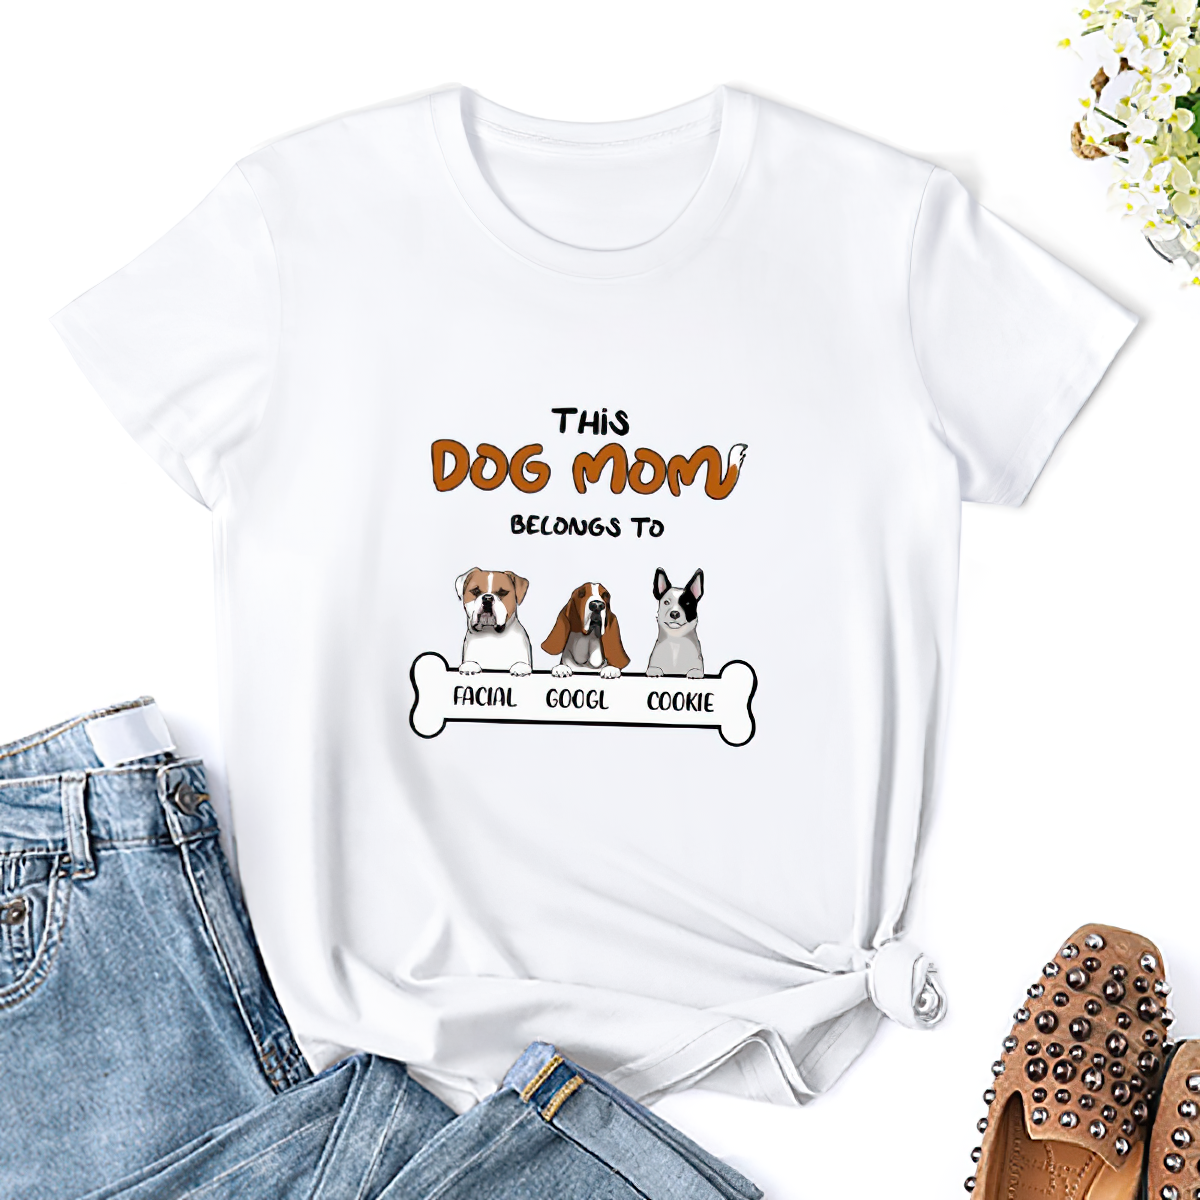 DOG LOVERS Personalized Custom T-shirt Gift For GIRLS